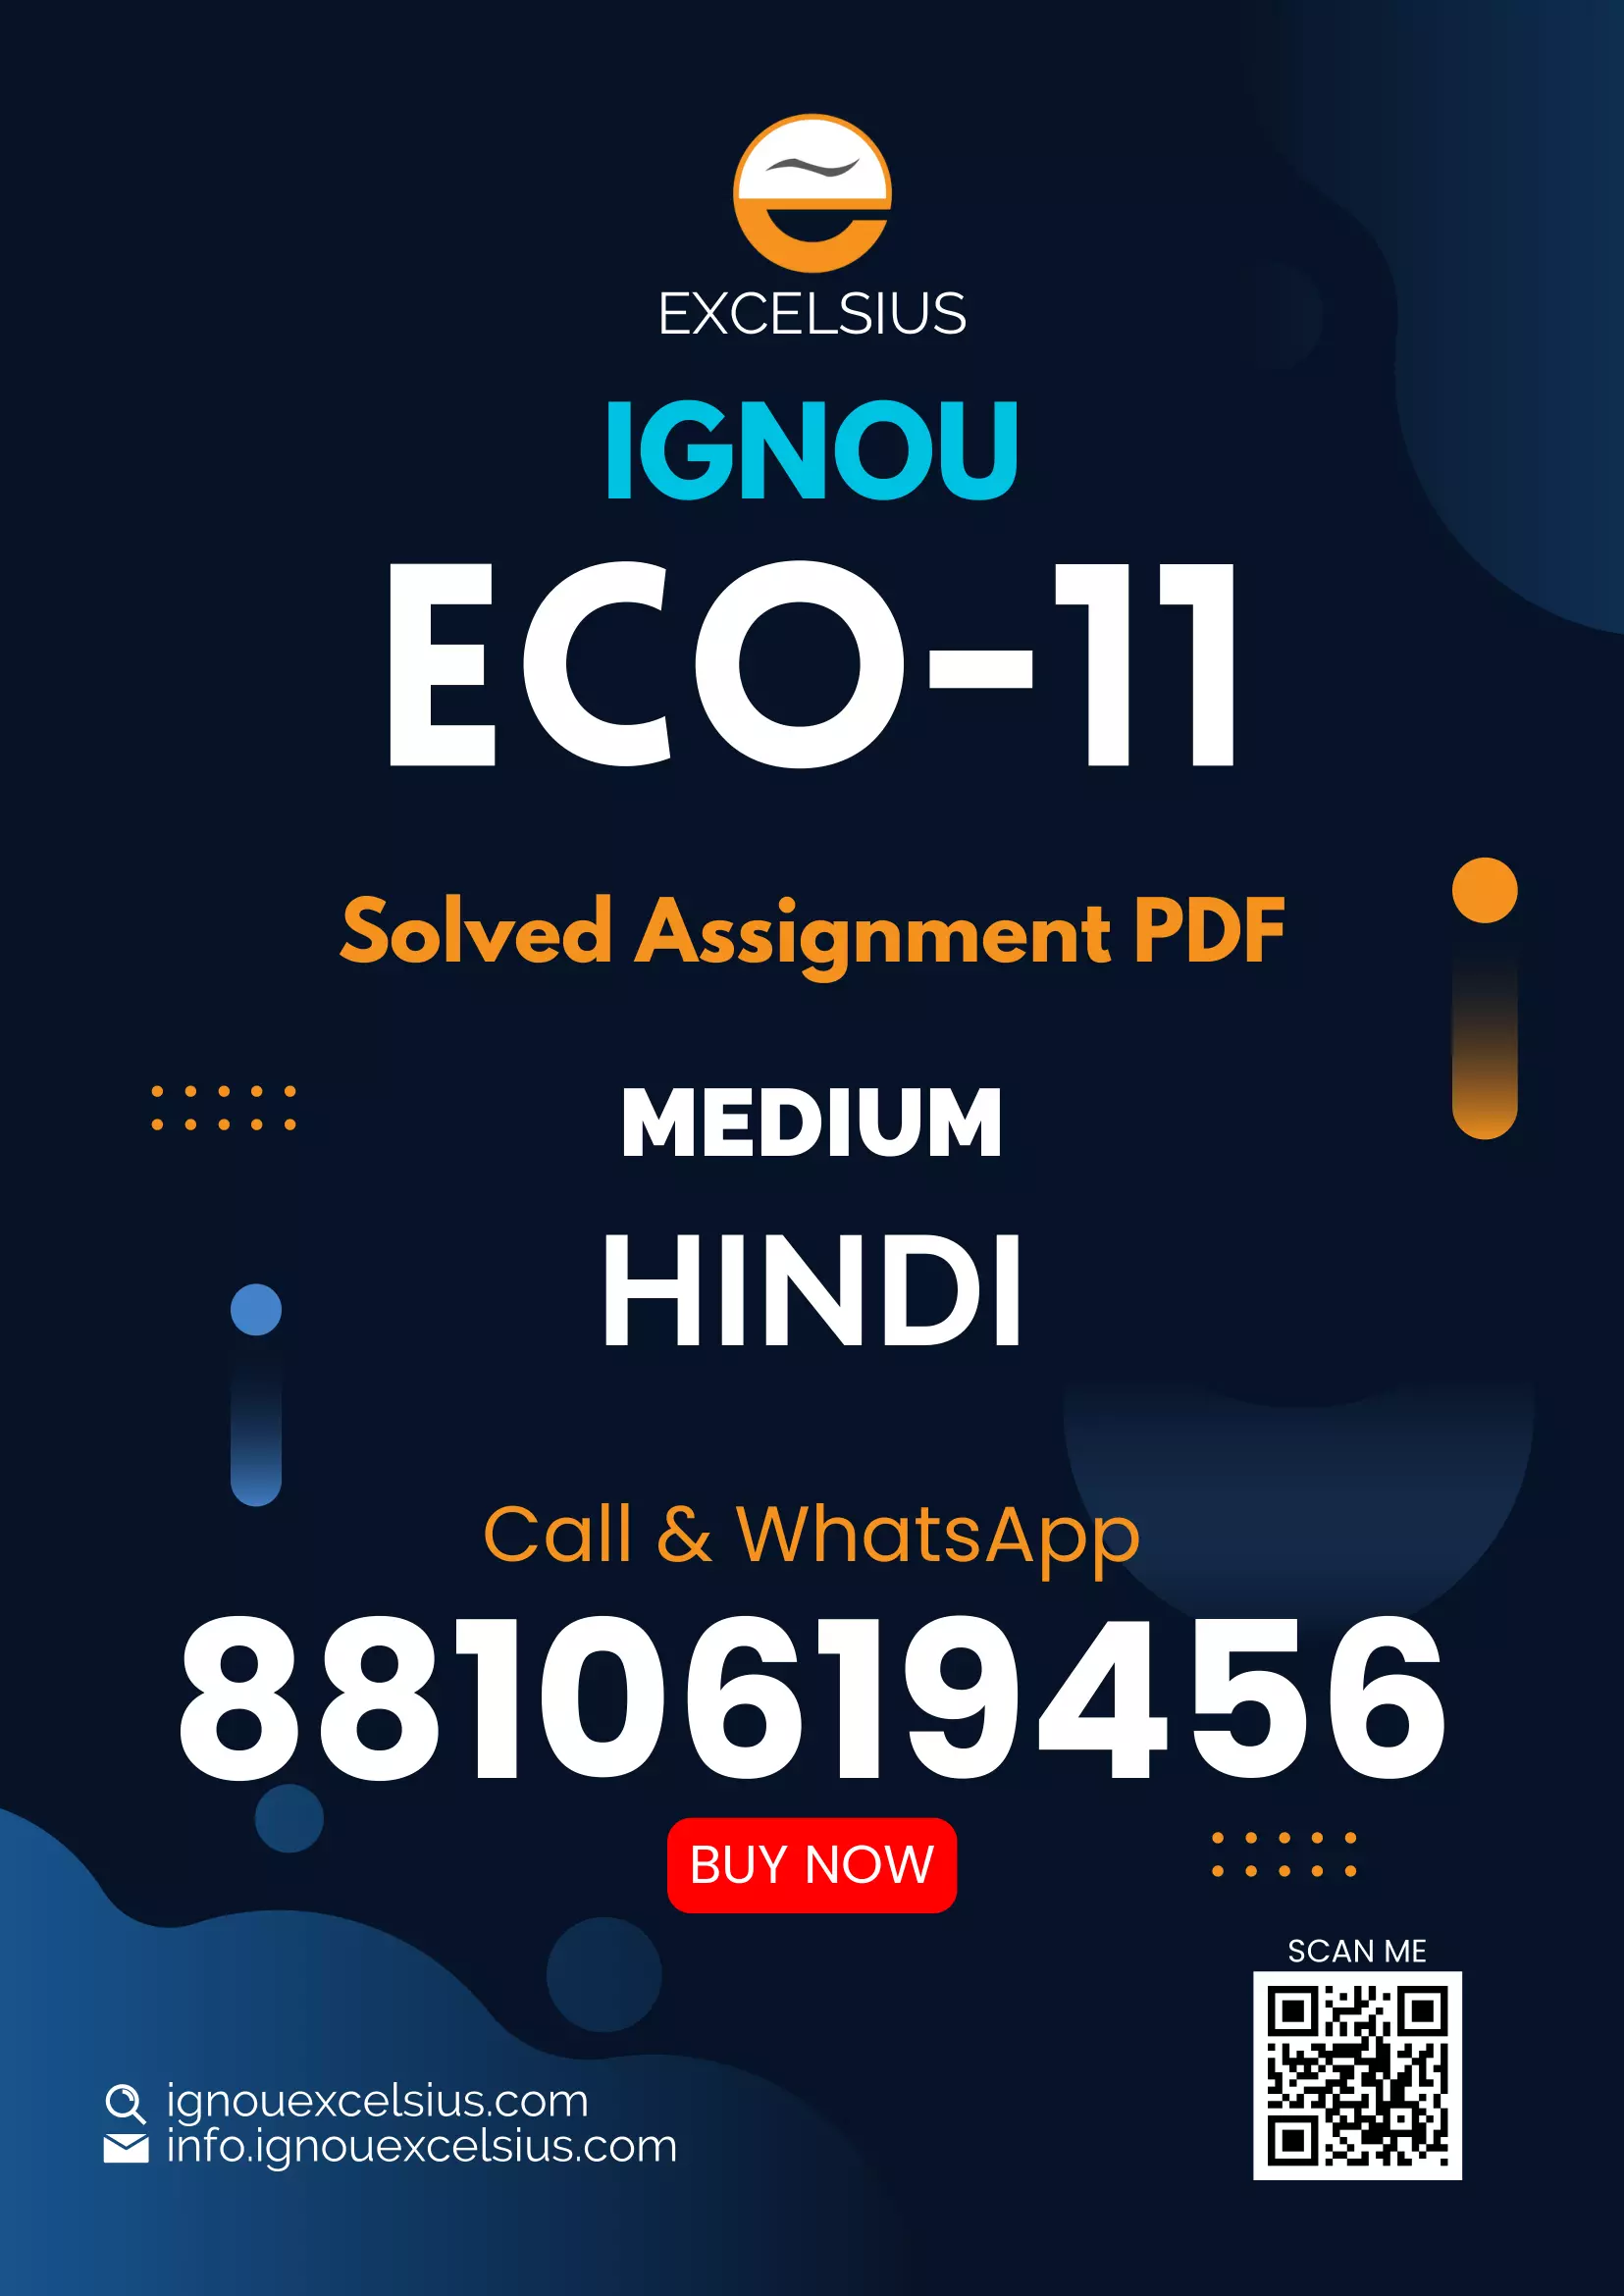 IGNOU ECO-11 - Elements of Income Tax, Latest Solved Assignment-July 2022 – January 2023